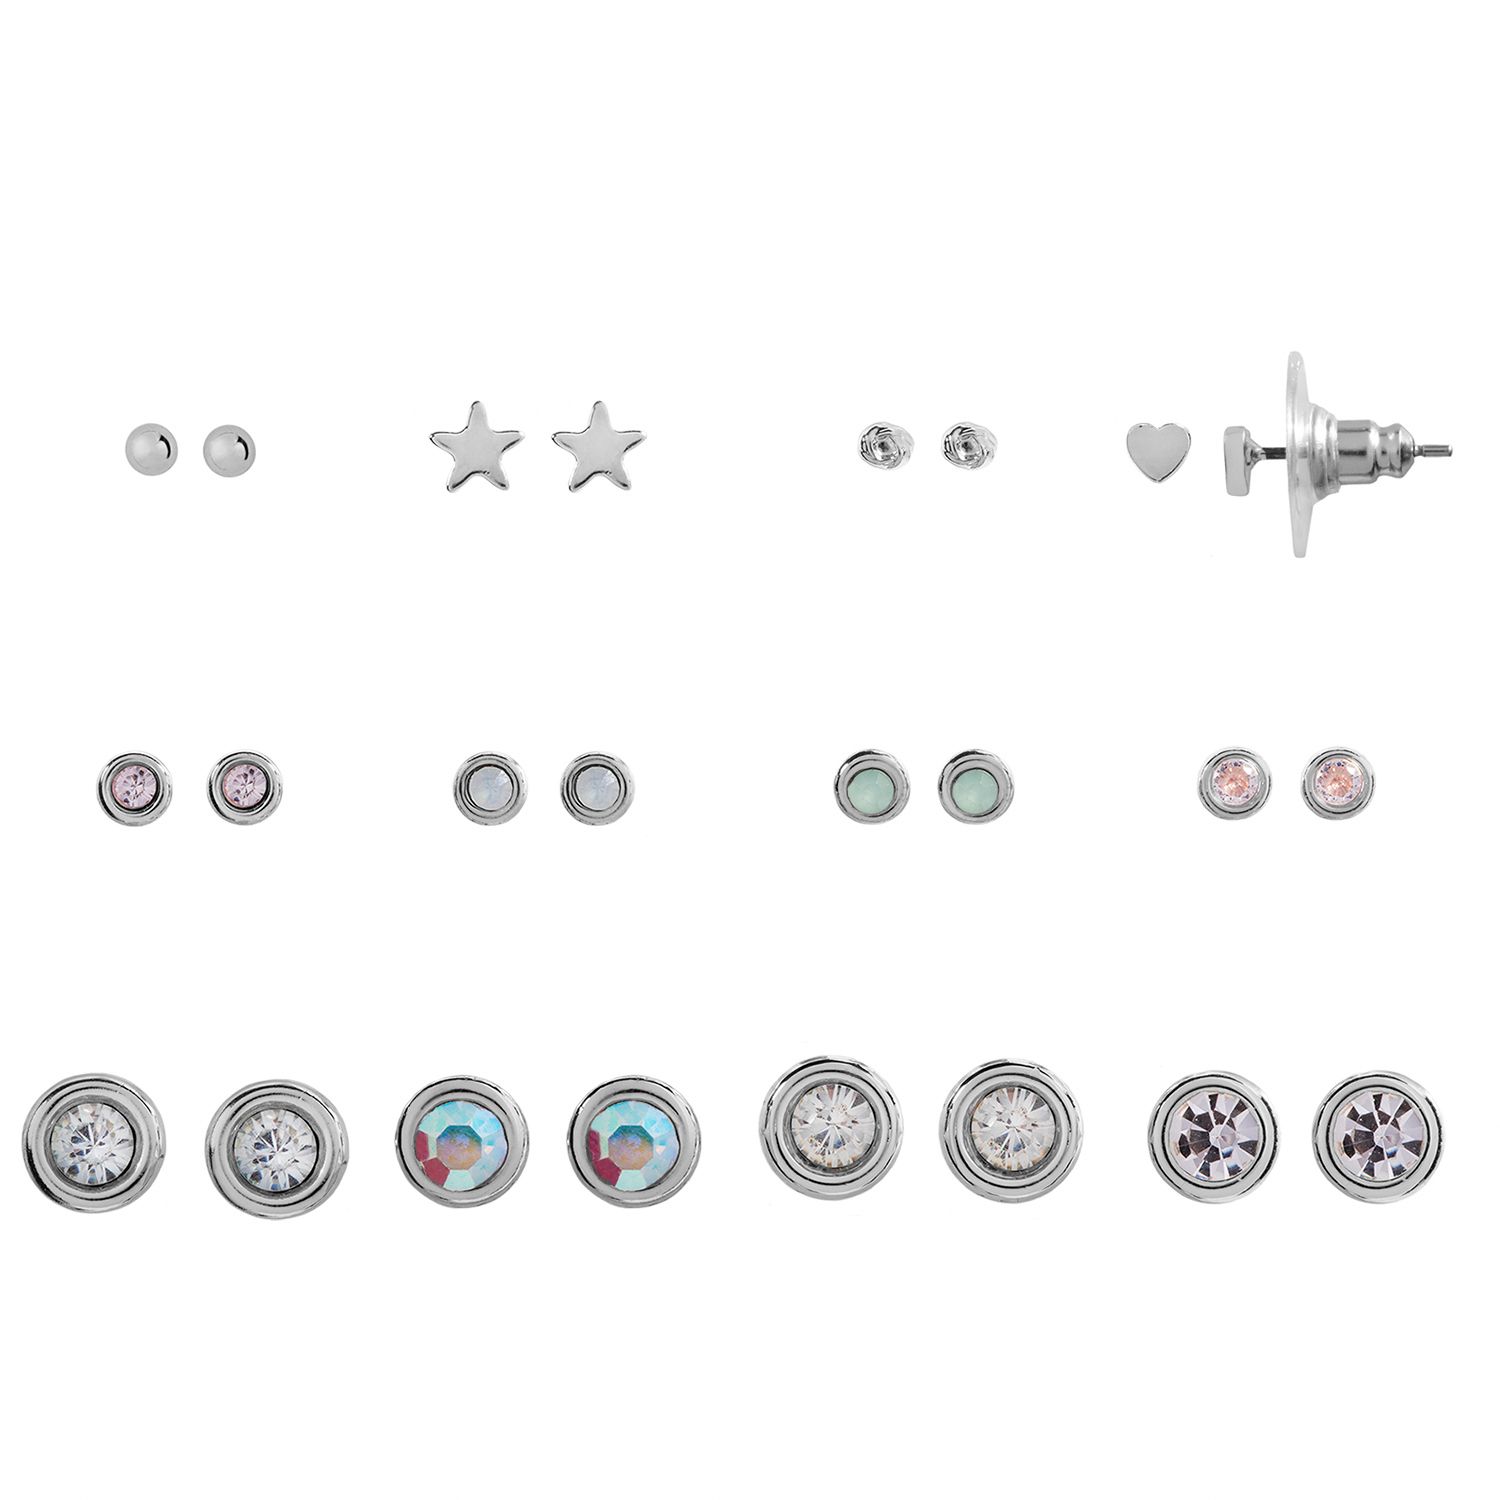 Image for LC Lauren Conrad Silver Tone Simulated Stone Nickel Free Stud Earring Set at Kohl's.